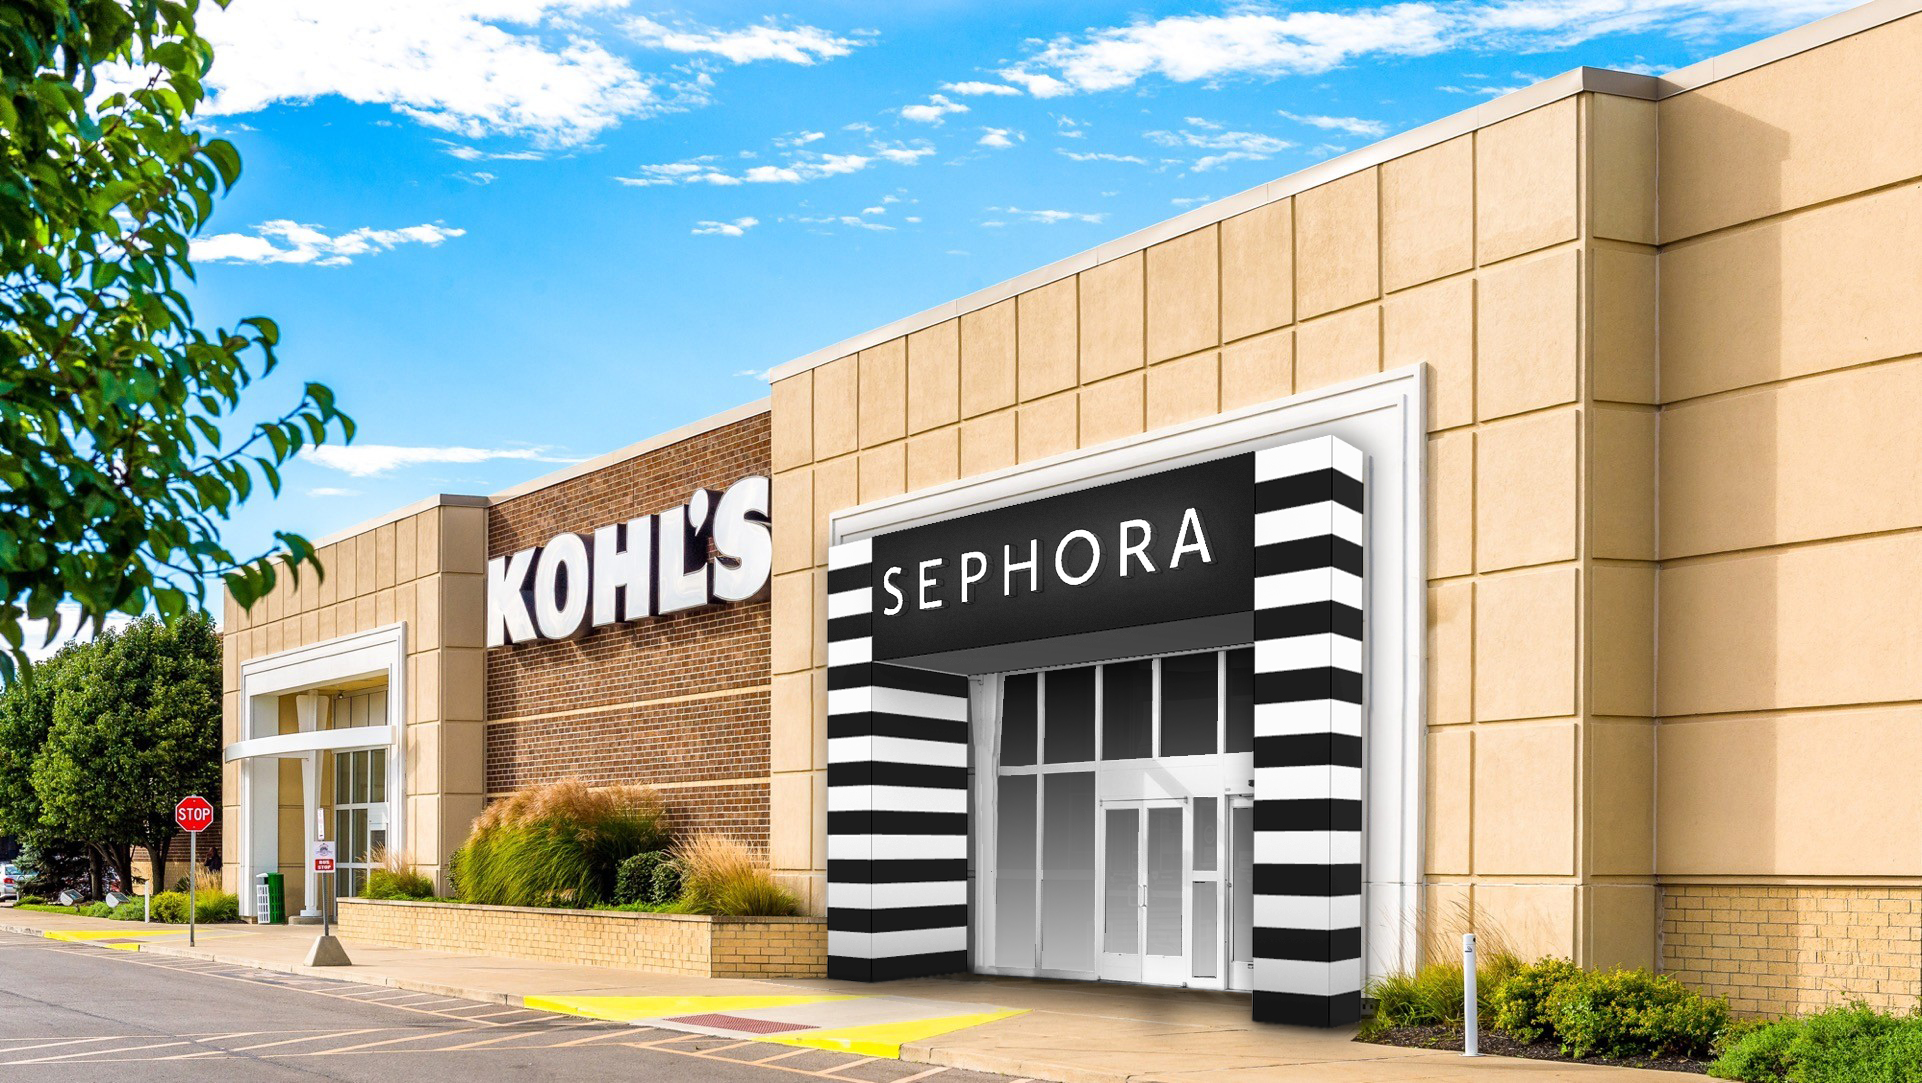 Kohl's Summer Cyber Deals are Back July 11-12